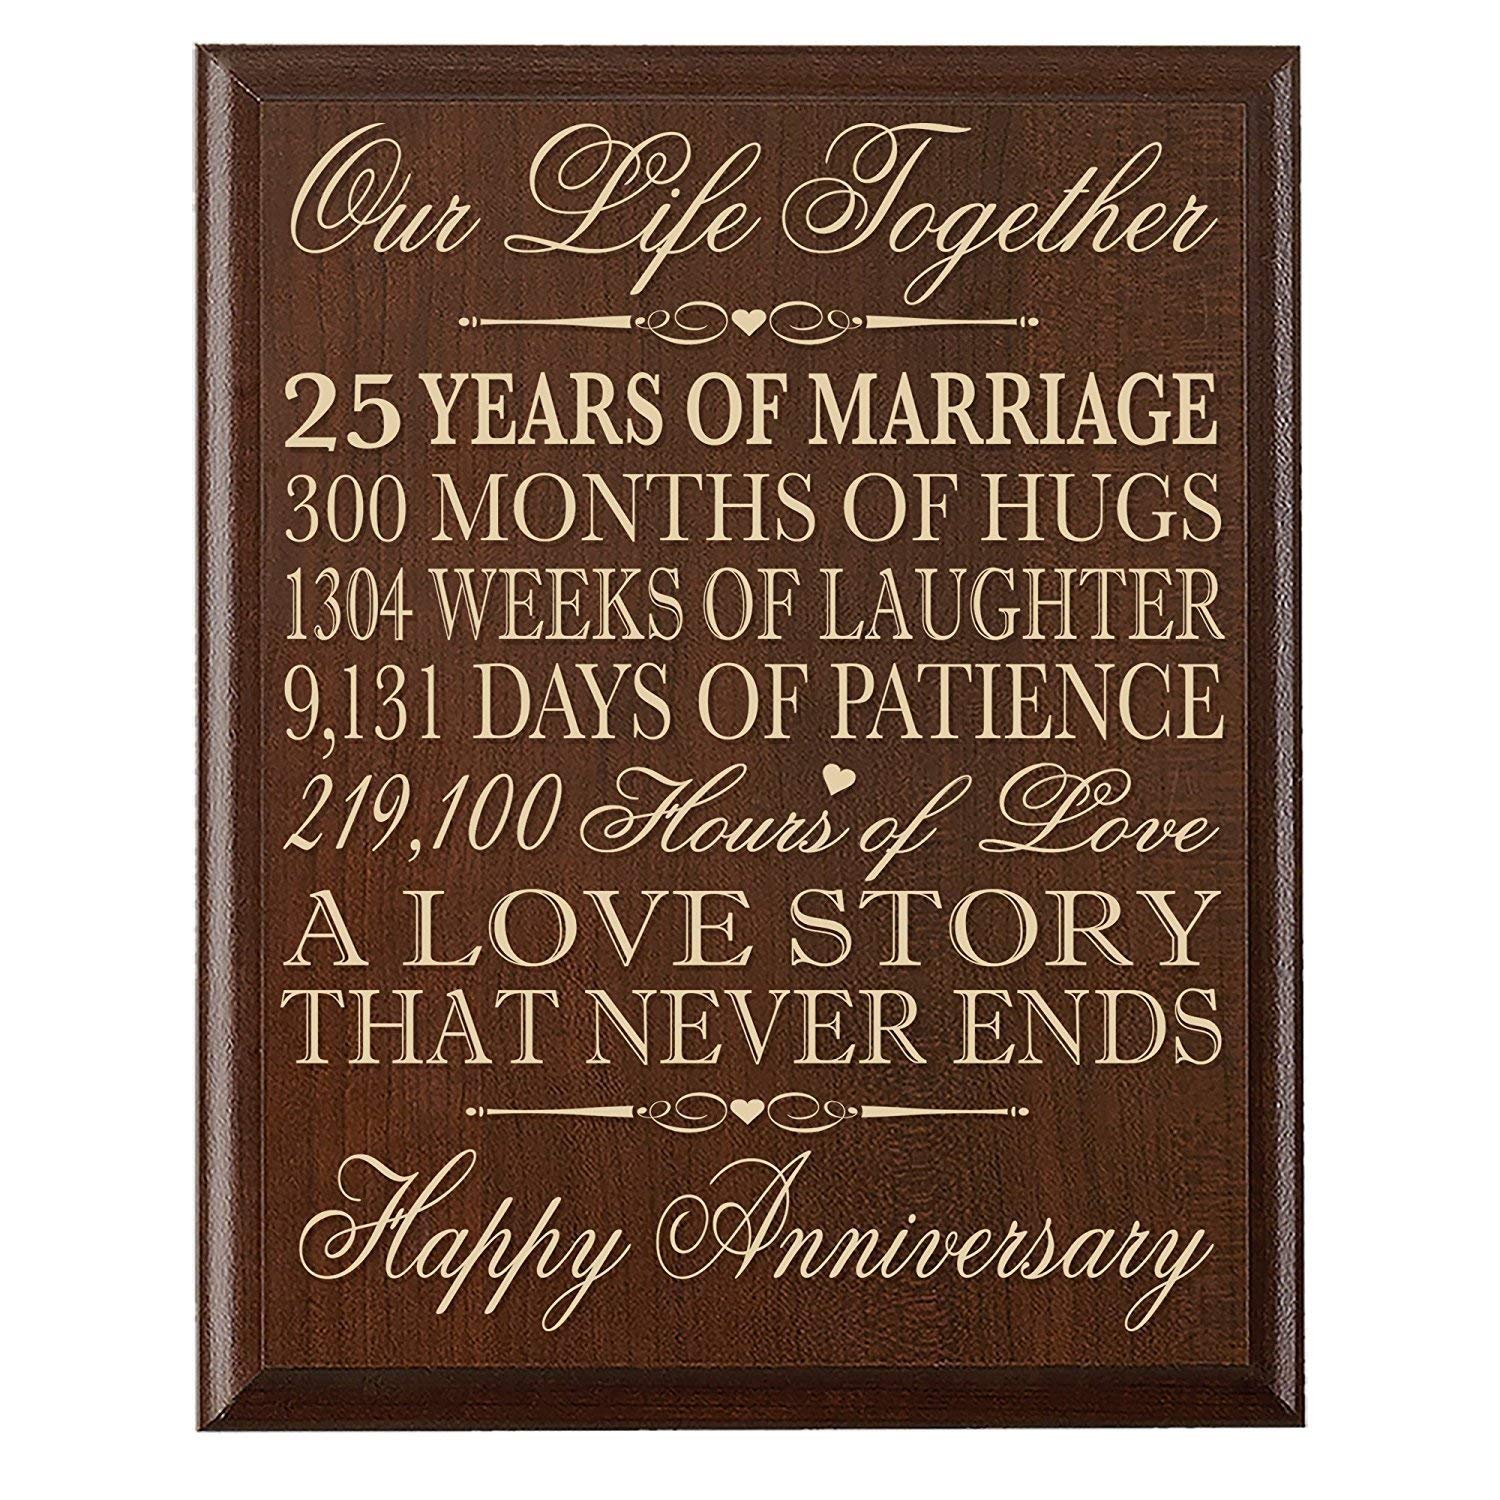 25th Wedding Anniversary Wall Plaque Gift "Our Life Together" - LifeSong Milestones